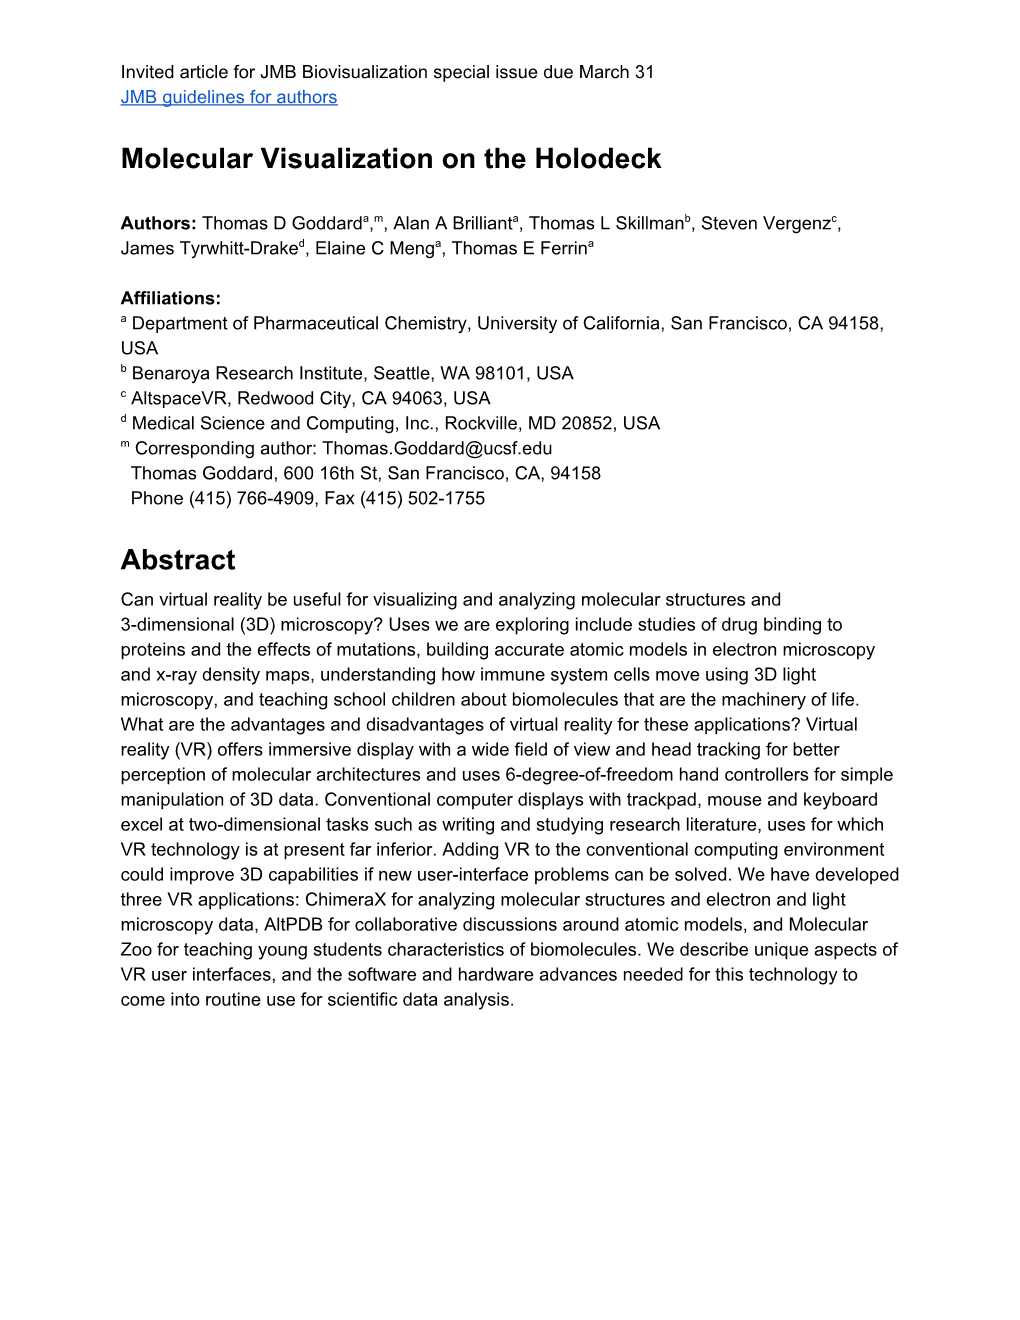 Molecular Visualization on the Holodeck Abstract